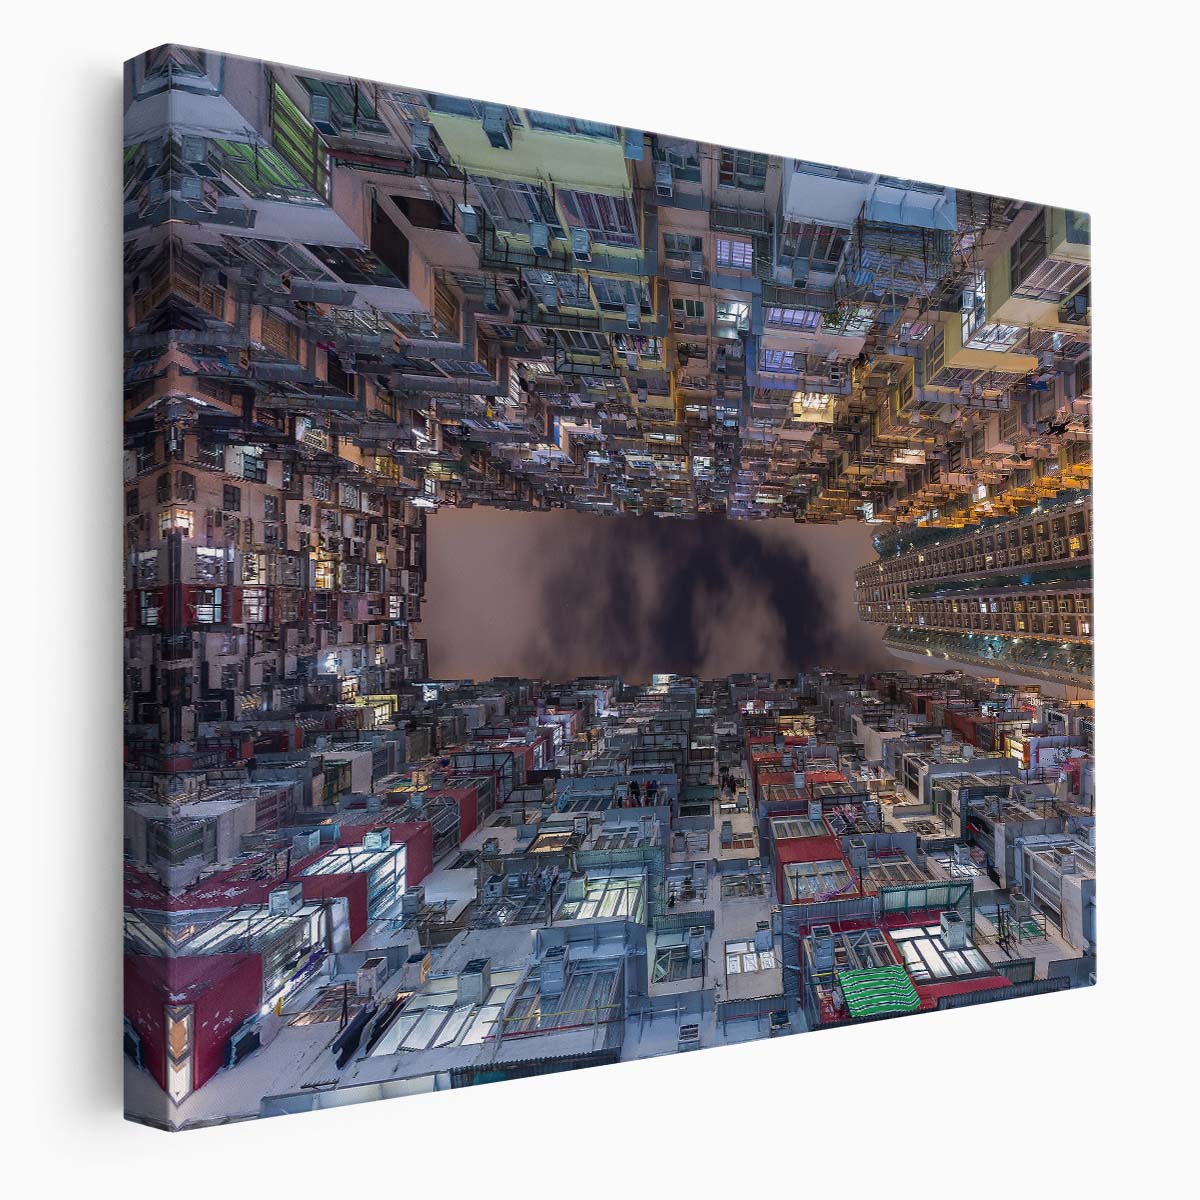 Hong Kong Iconic Night Cityscape Architecture Wall Art by Luxuriance Designs. Made in USA.